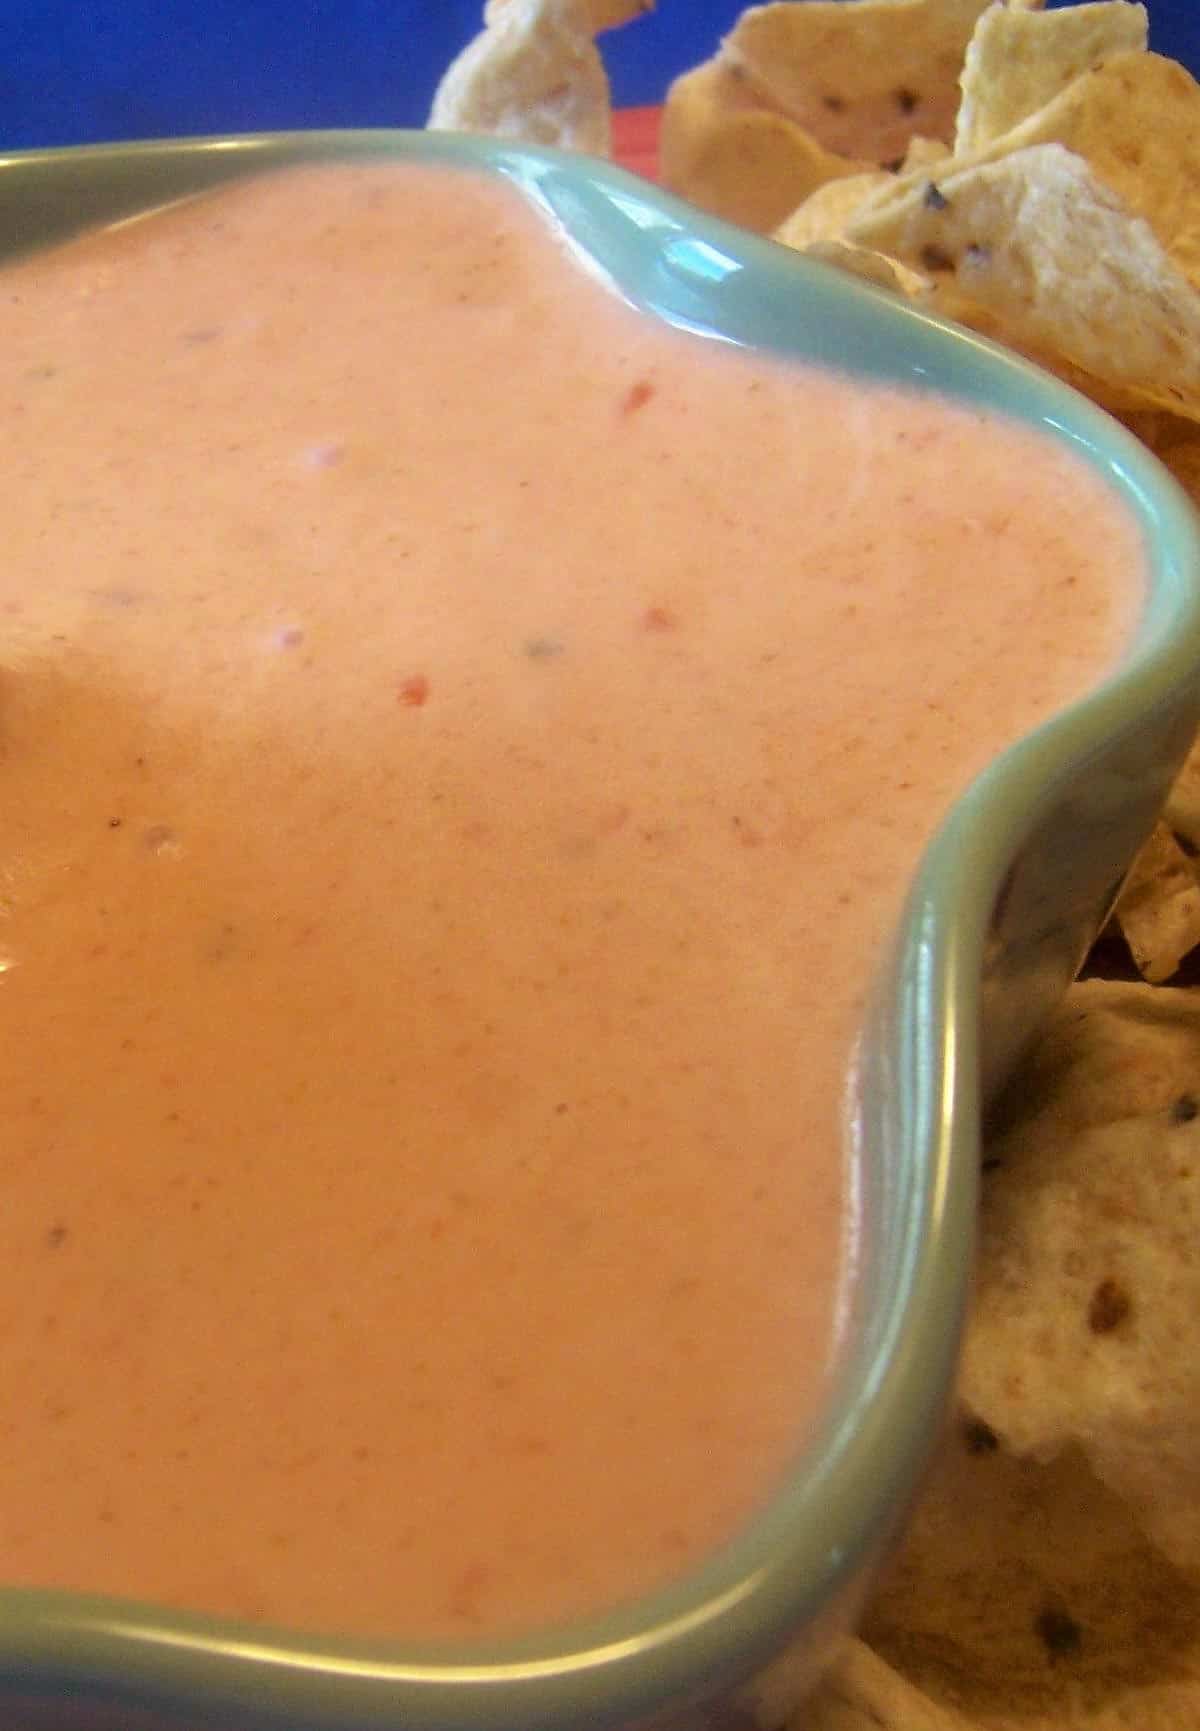 Mouth-watering Pancho’s cheese dip to savor!